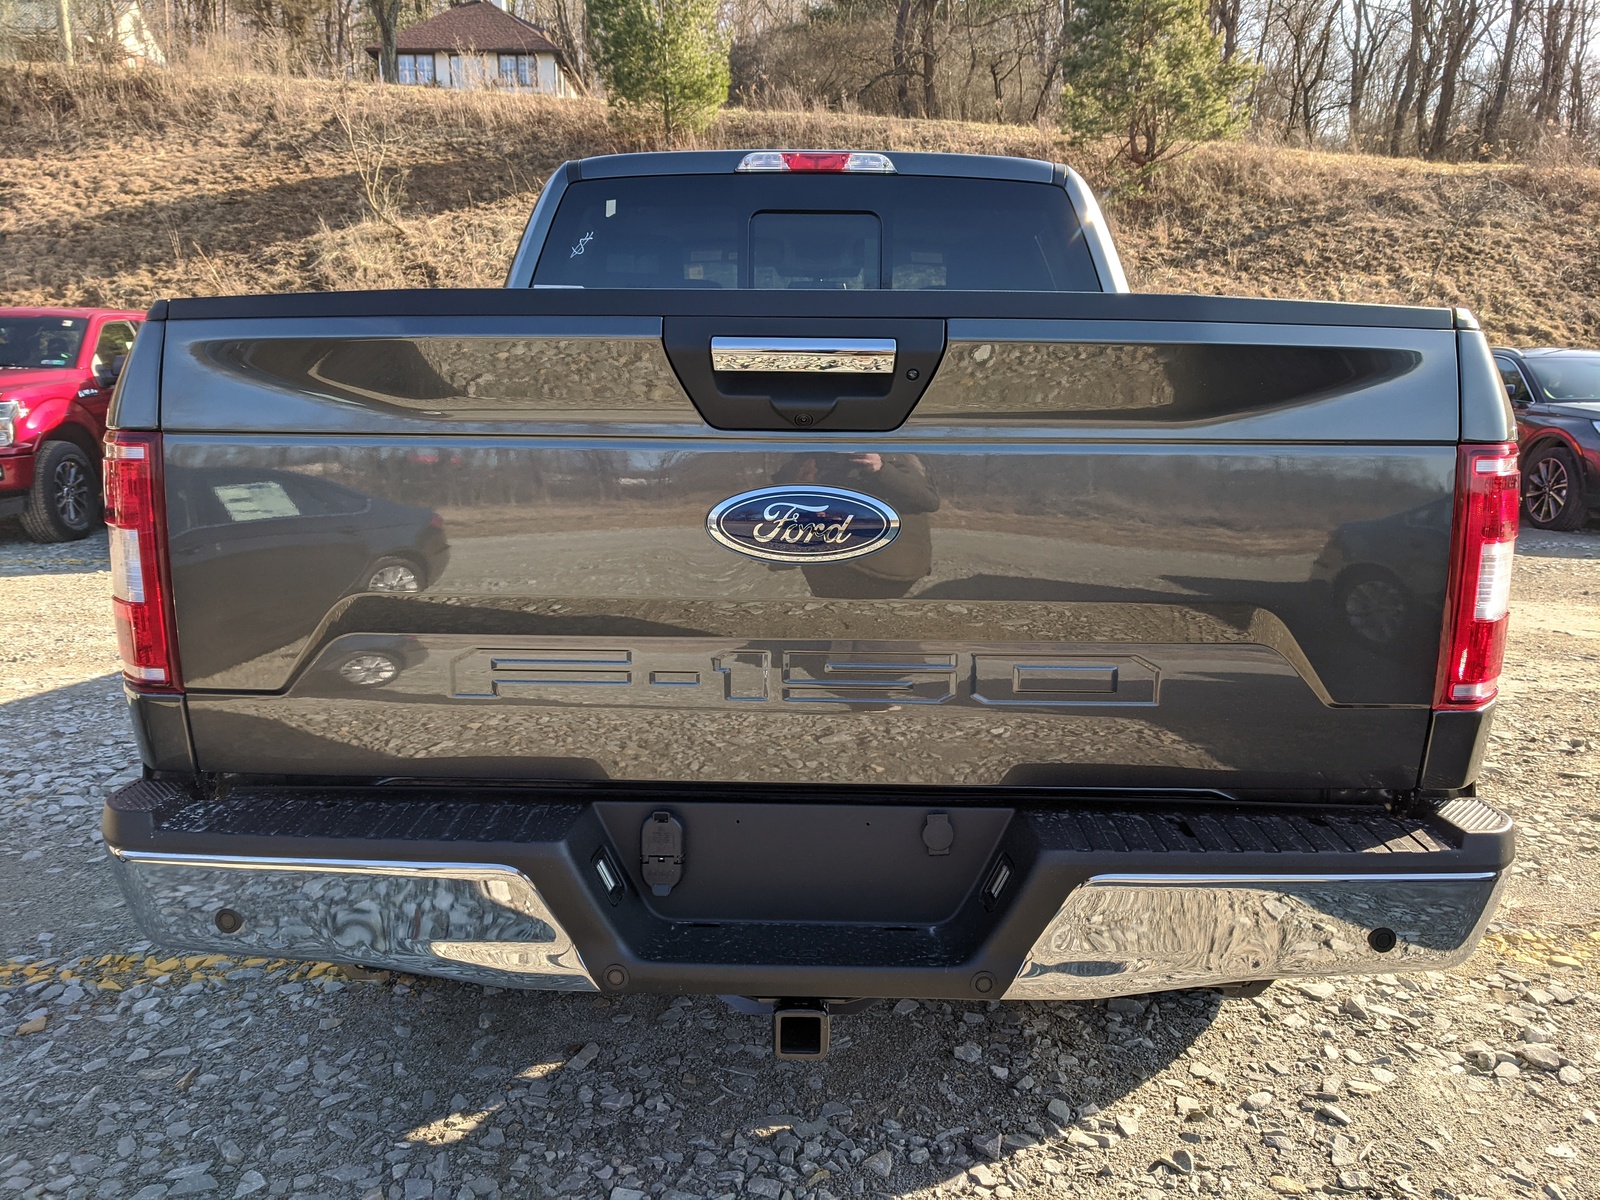 New 2020 Ford F 150 Xlt In Magnetic Metallic Greensburg Pa F03362